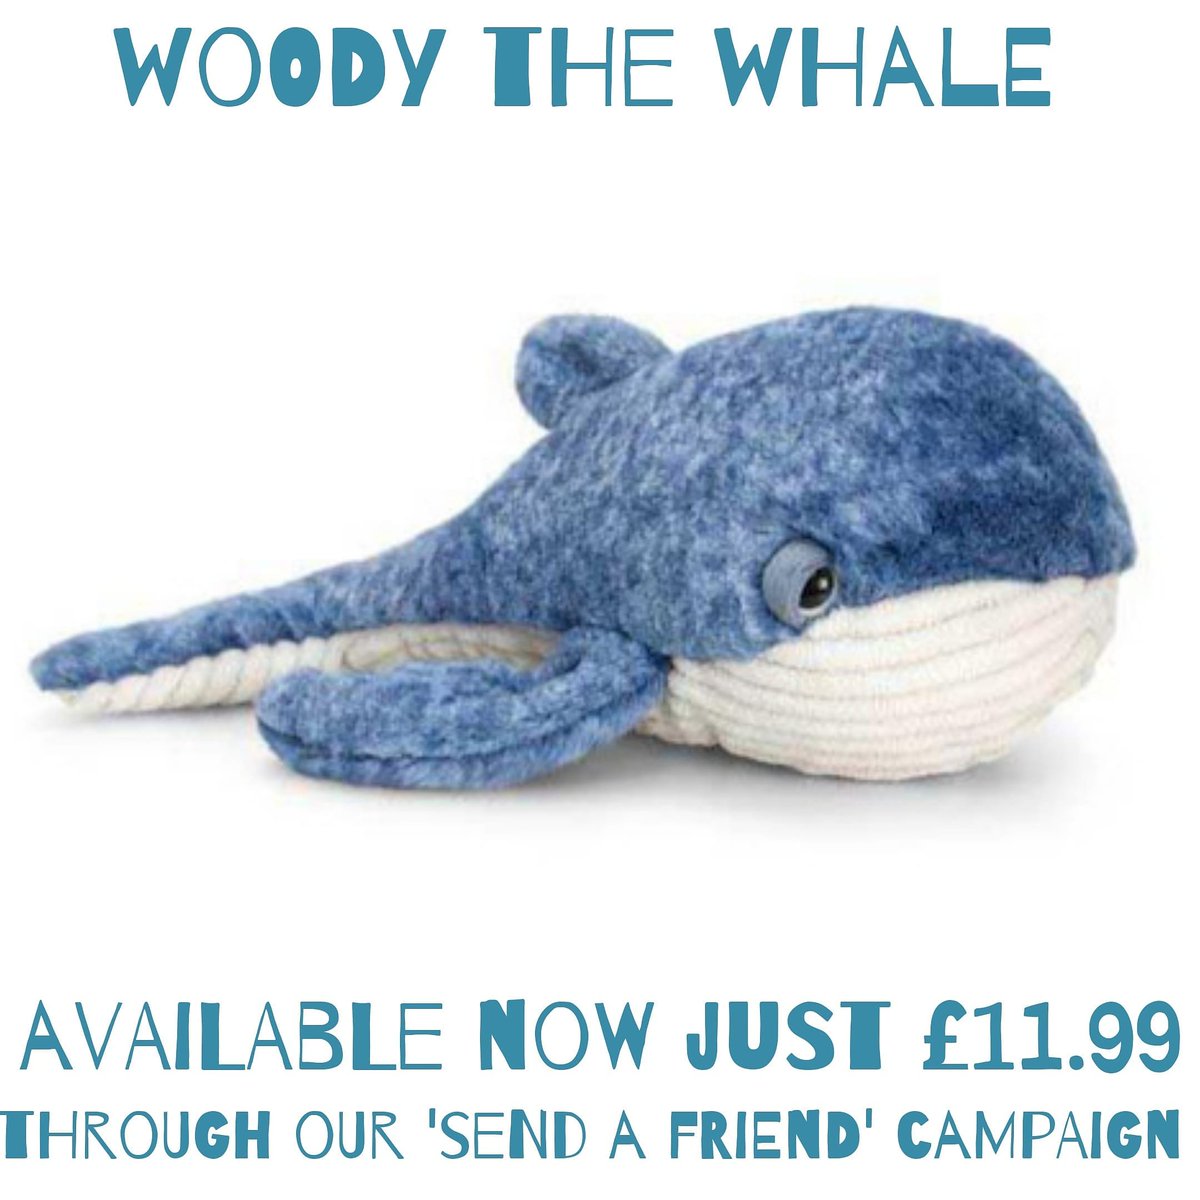 !LOOK WHO'S BACK! 🐳👀💙 Our special mascot toy Woody the Whale is back in stock! Don't forget with every whale toy we sell to you we will also donate 2, (yes TWO!) soft toys in your name to very sick children in hospital! Do something amazing & 'Send a Friend' today! LIB*